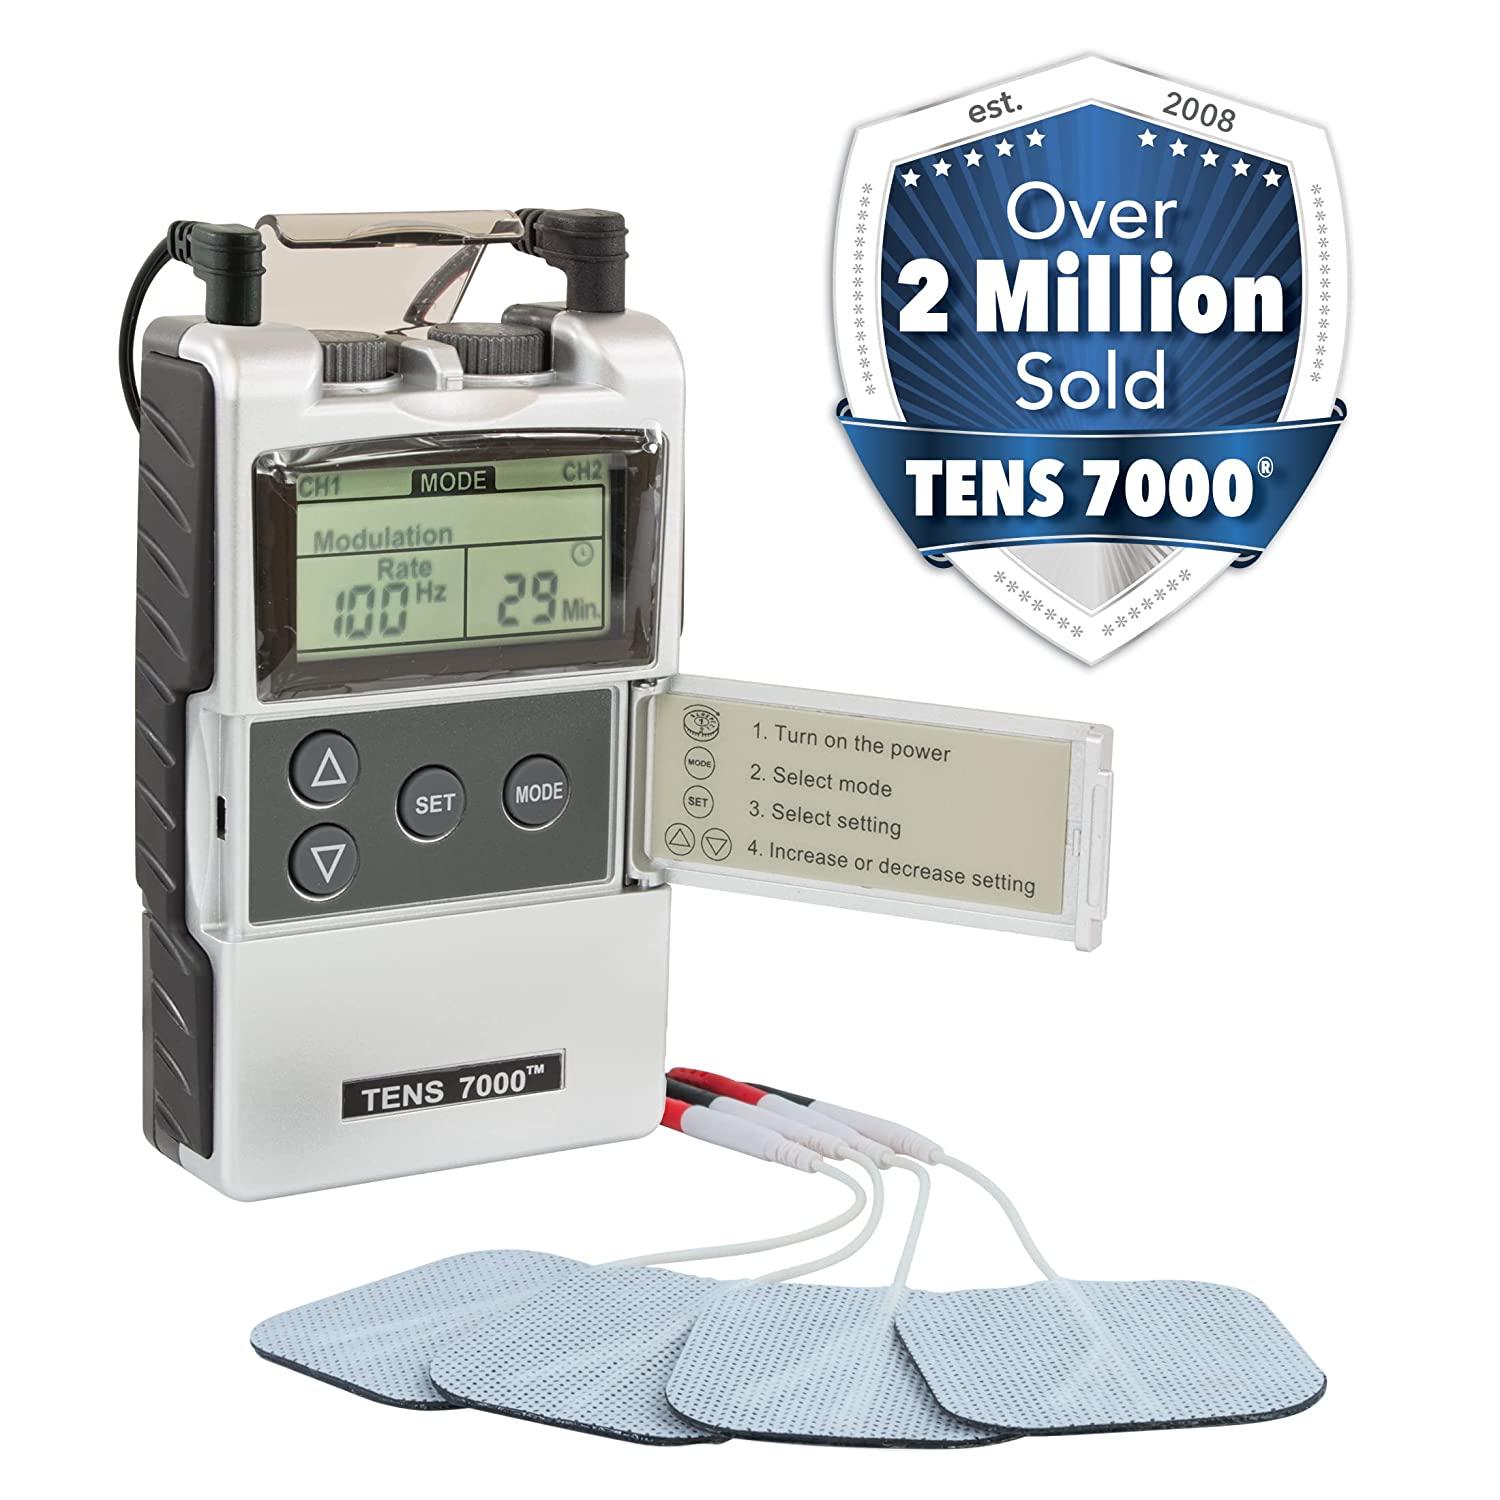 Relieve Neck Pain using a TENS Machine - TENS Machines for Sale